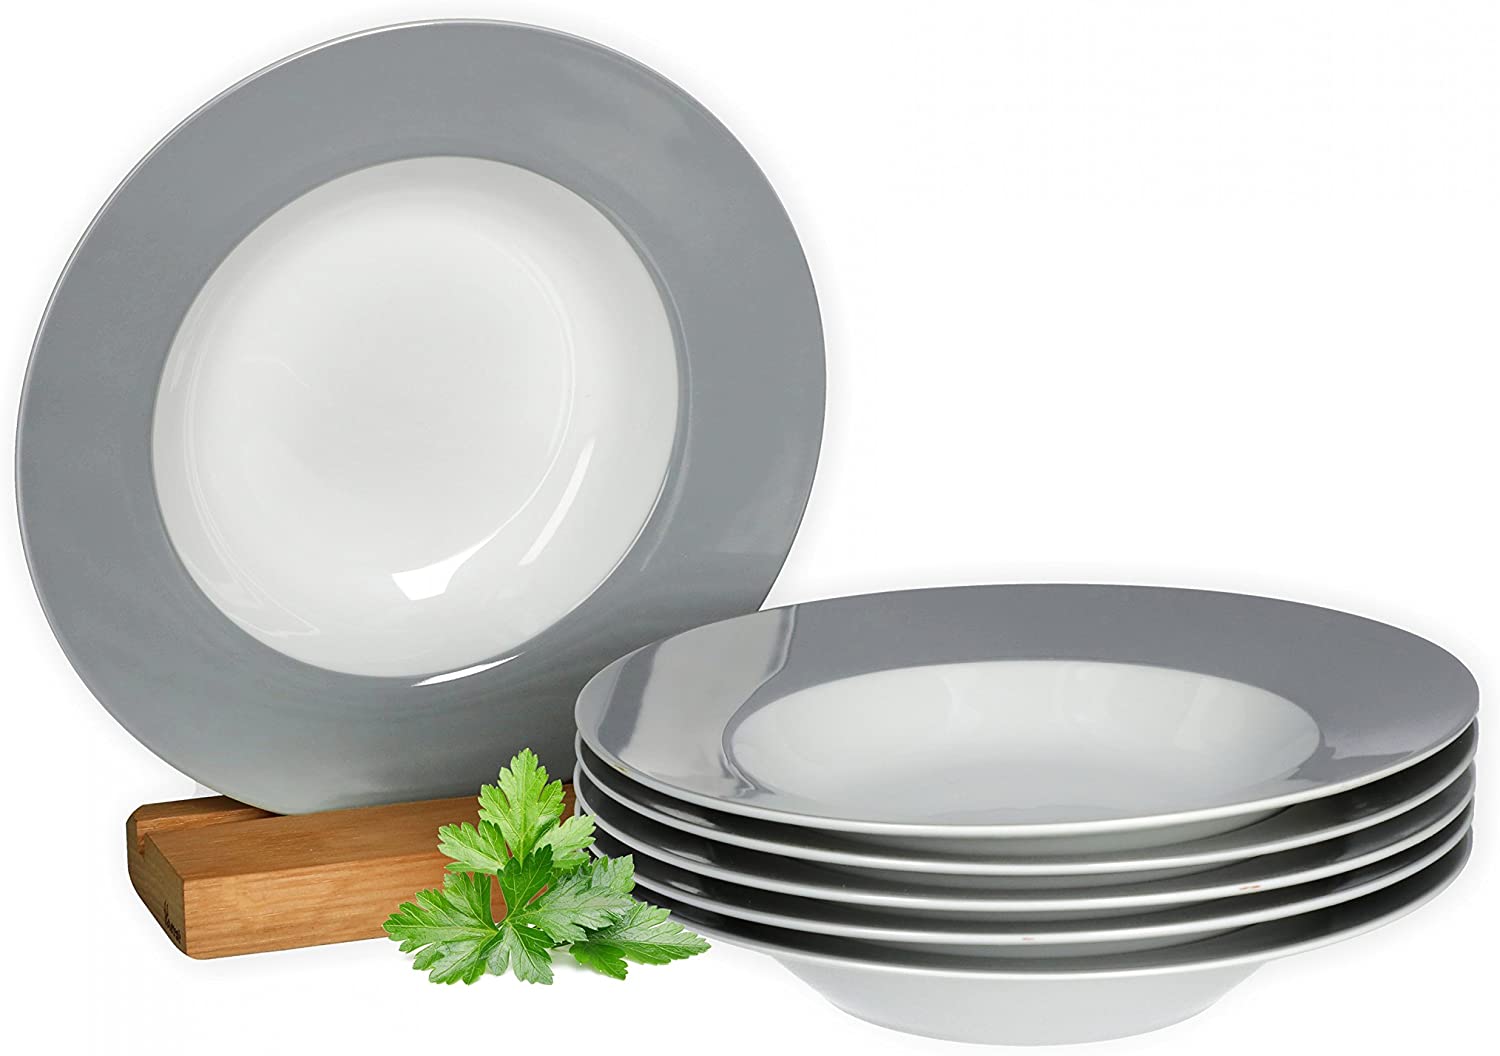 Van Well Vario Soup Plate Set 6 Pieces I Plate Service for 6 People I Deep Pasta Plate 21.5 cm I Porcelain Set White with Grey Rim I Salad Plate Microwavable